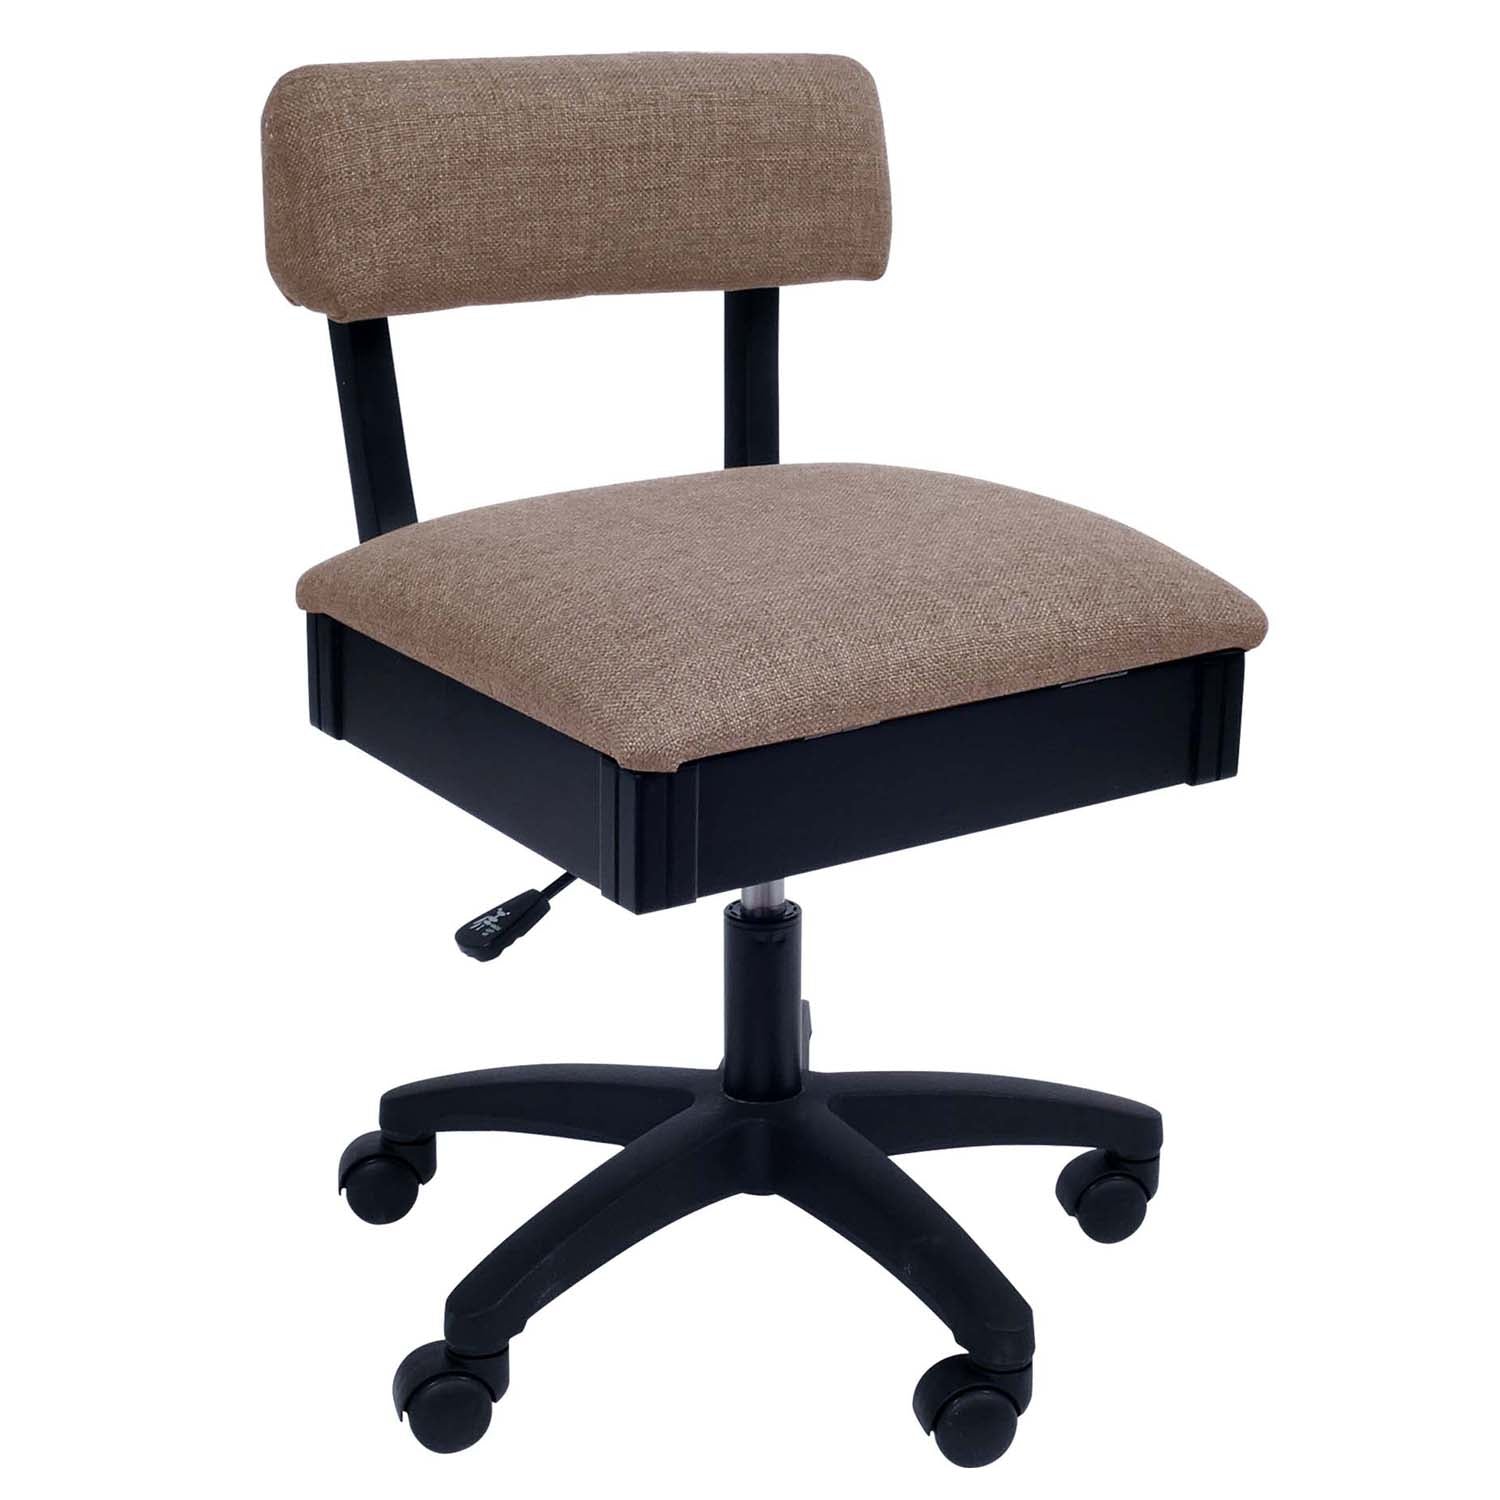 Arrow Black Sewing Notions Sewing Chair with White Finish - FREE